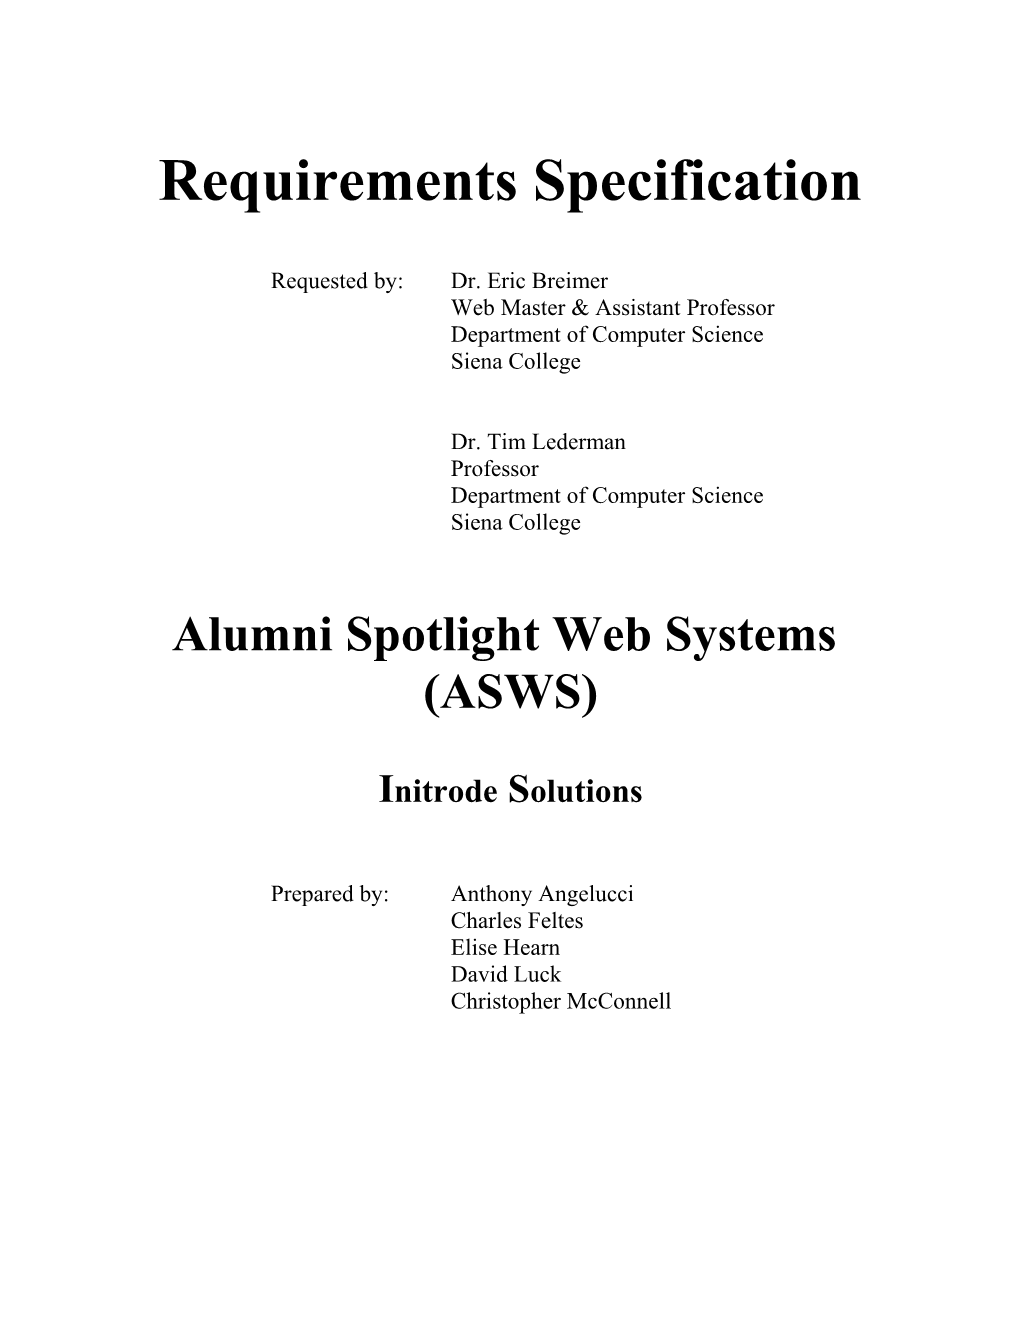 Alumni Spotlight Web Systems - Requirements Specification